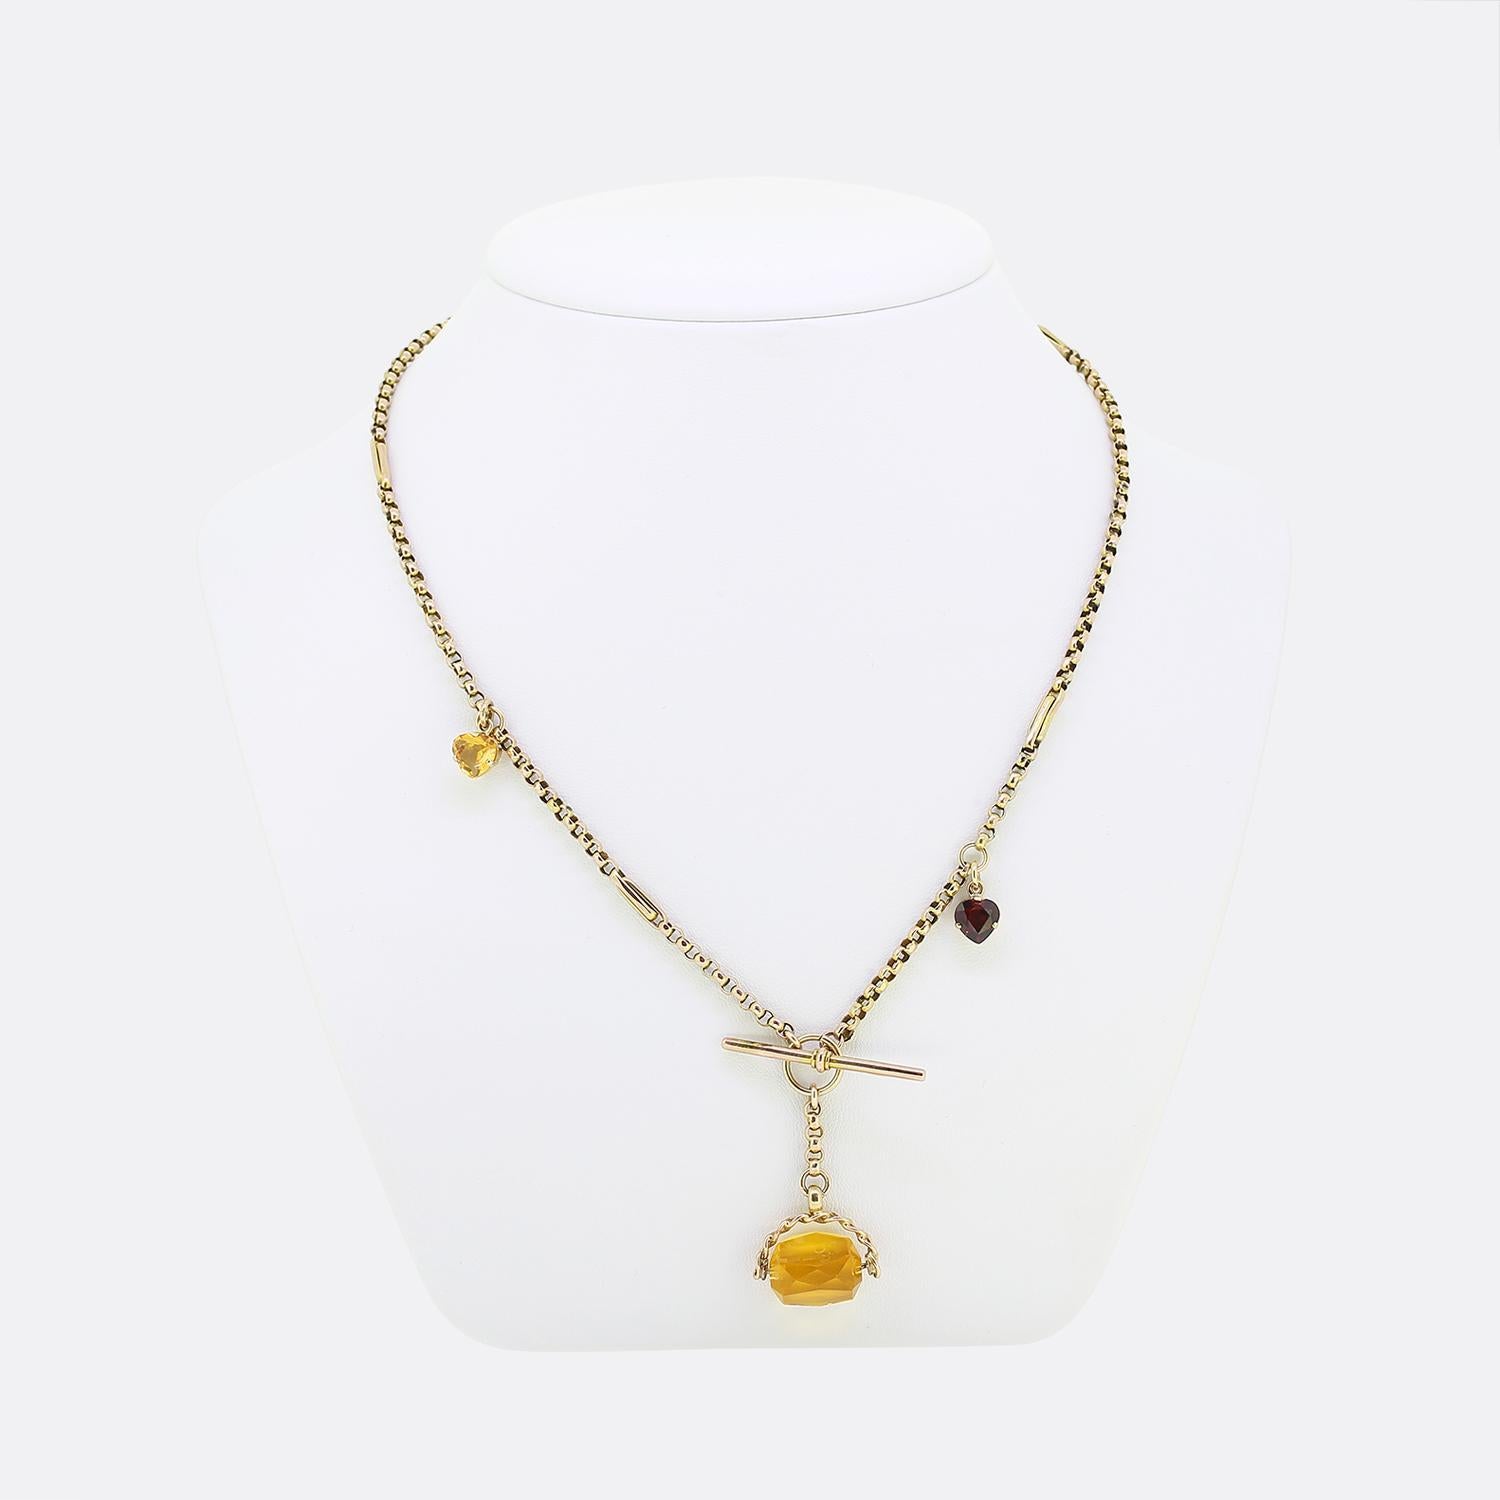 Here we have a beautiful multi gemstone charm necklace. A 9ct yellow gold chain with a T bar fastening focally suspends a large citrine set fob which freely spins at the wearers discretion. This principal stone is then accompanied by a duo of heart